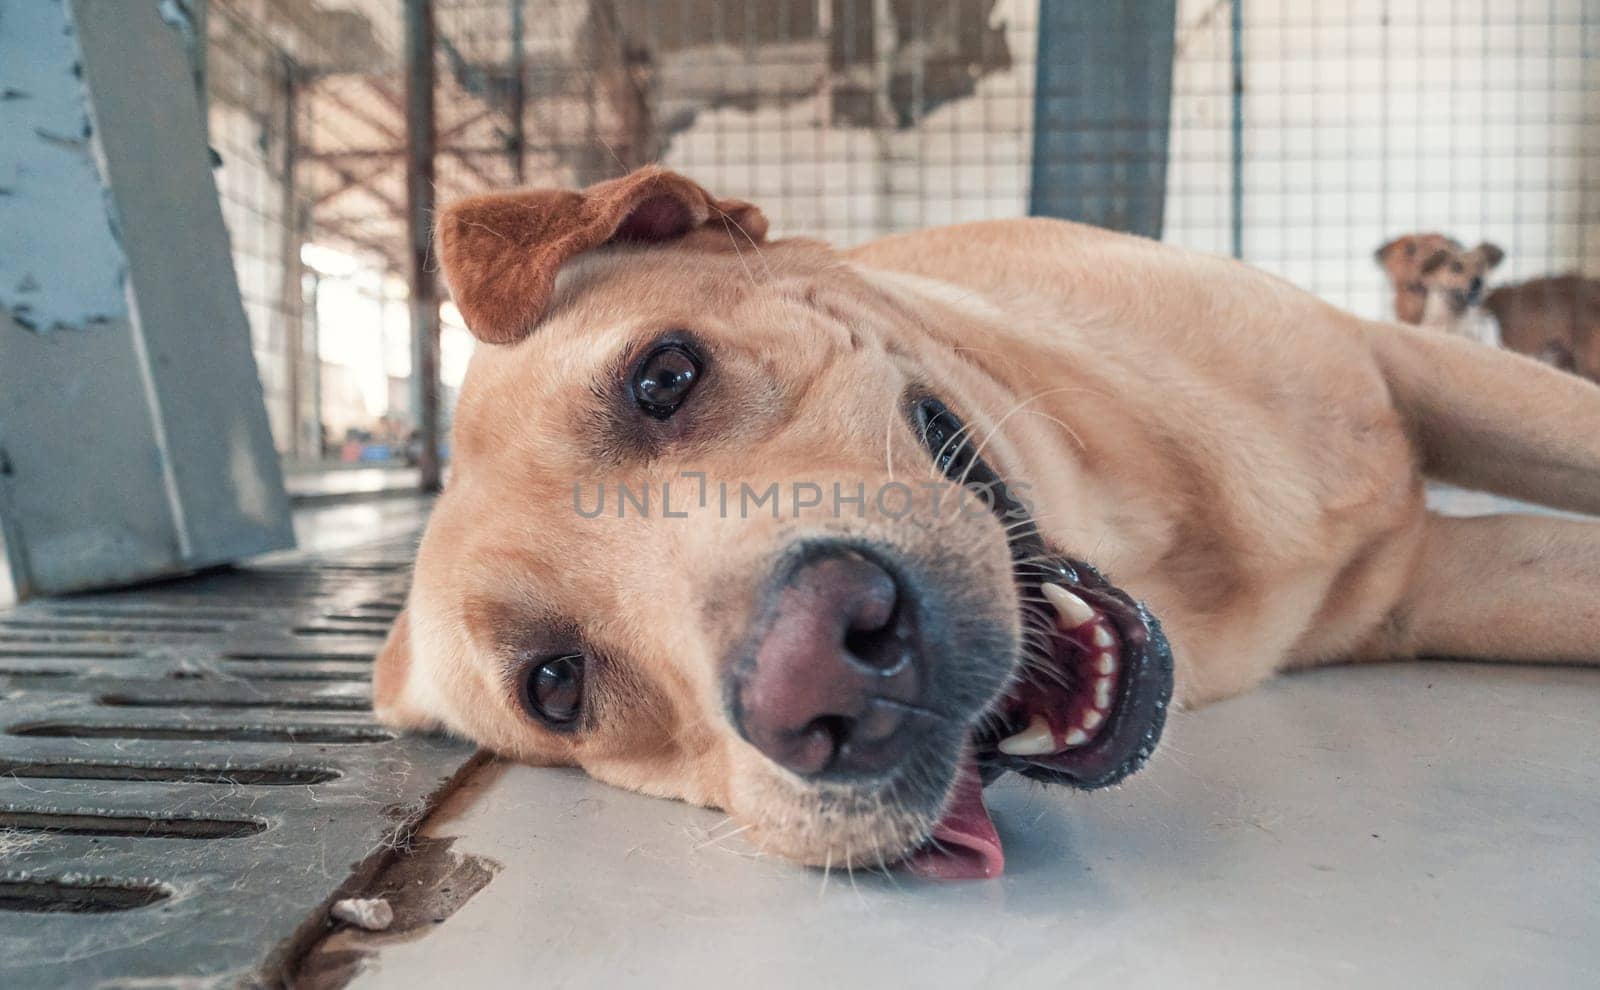 Labrador dog in shelter waiting to be rescued and adopted to new home.